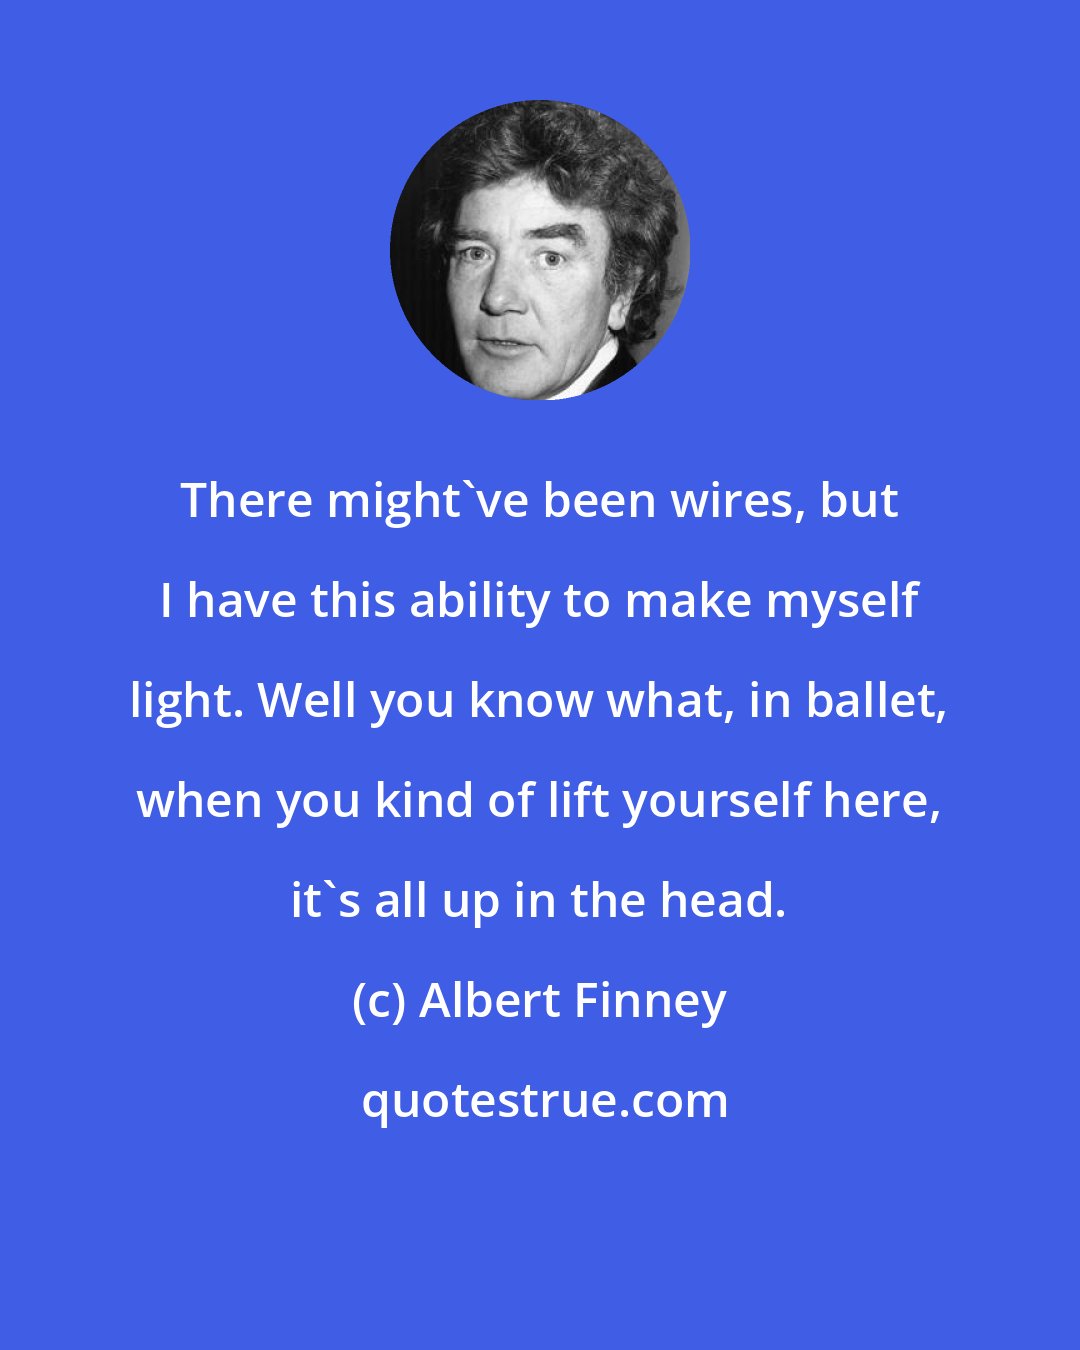 Albert Finney: There might've been wires, but I have this ability to make myself light. Well you know what, in ballet, when you kind of lift yourself here, it's all up in the head.